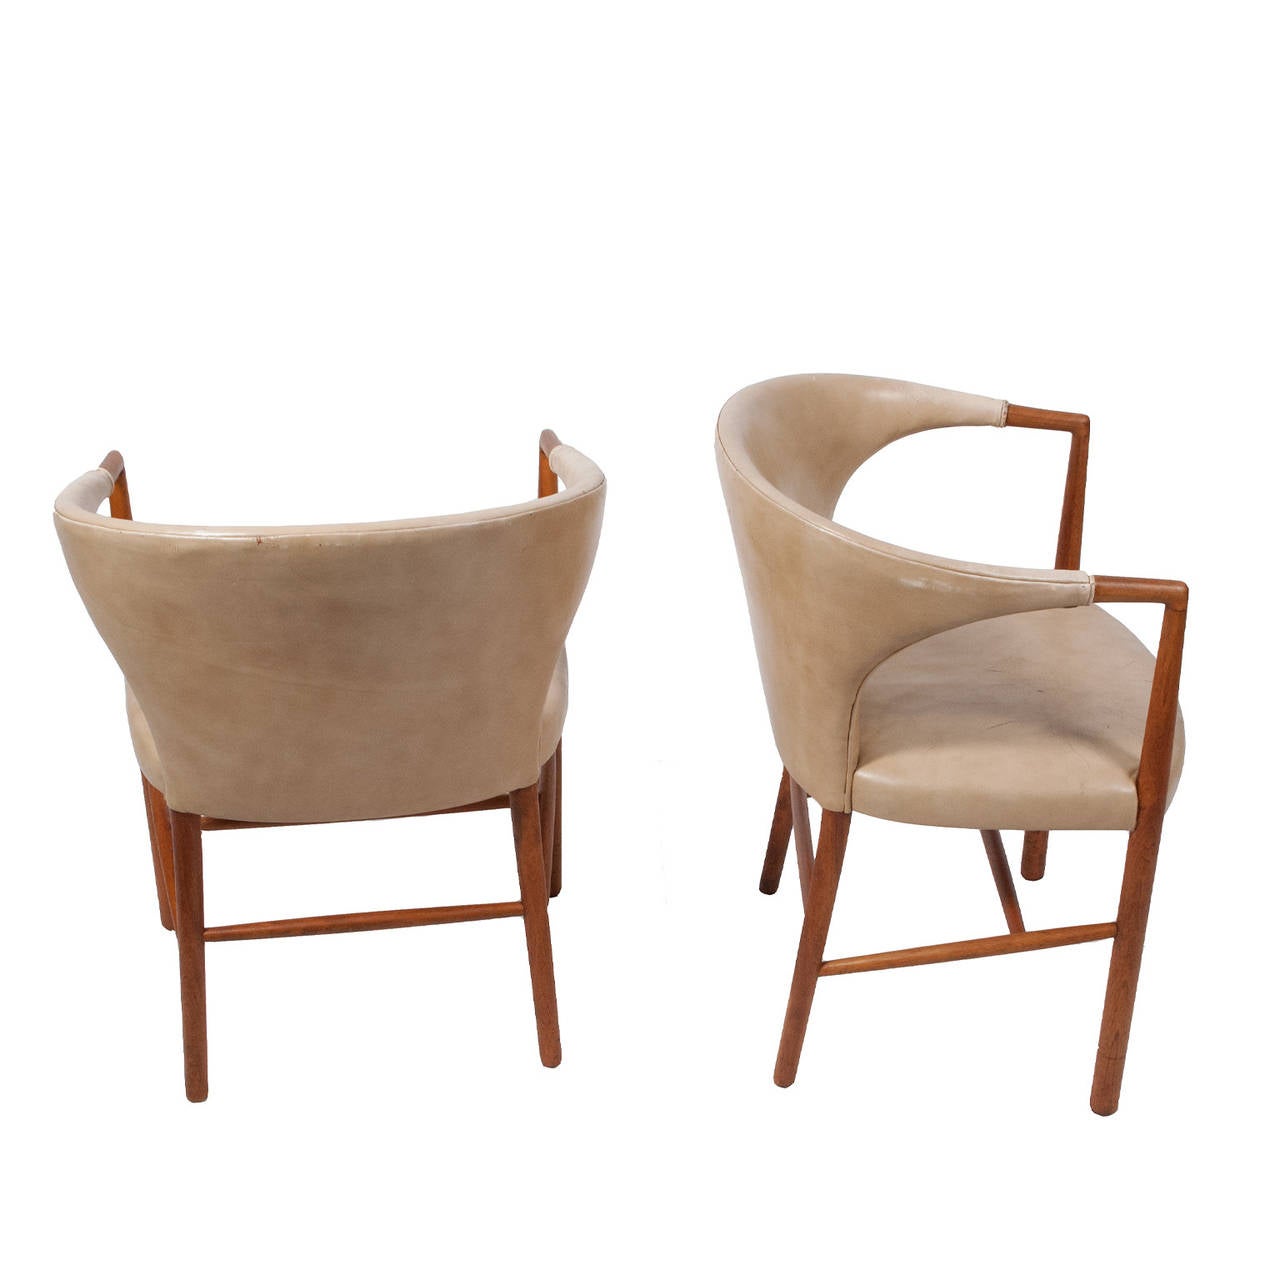 Mid-20th Century Pair of UN Armchairs by Jacob Kjaer